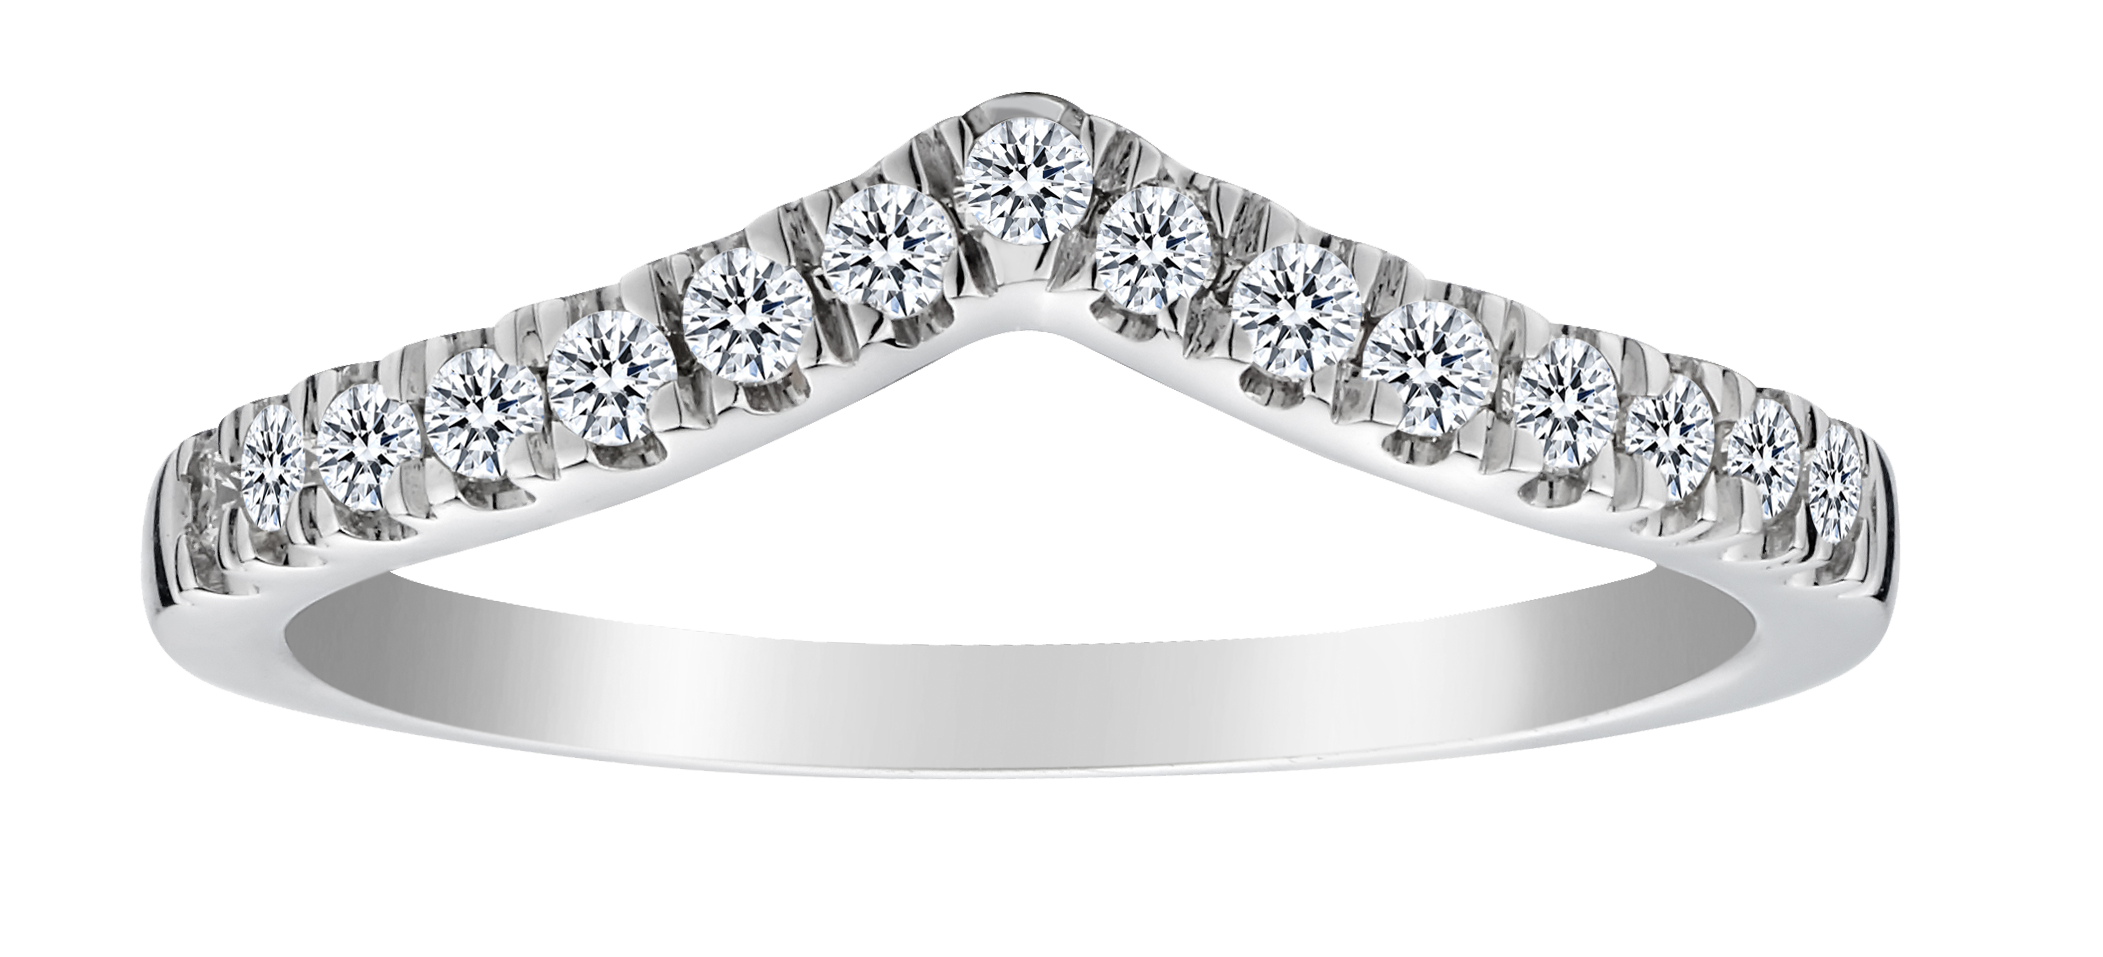 .25 Carat Diamond Band Ring, 10kt White Gold. Fashion Rings. Griffin Jewellery Designs